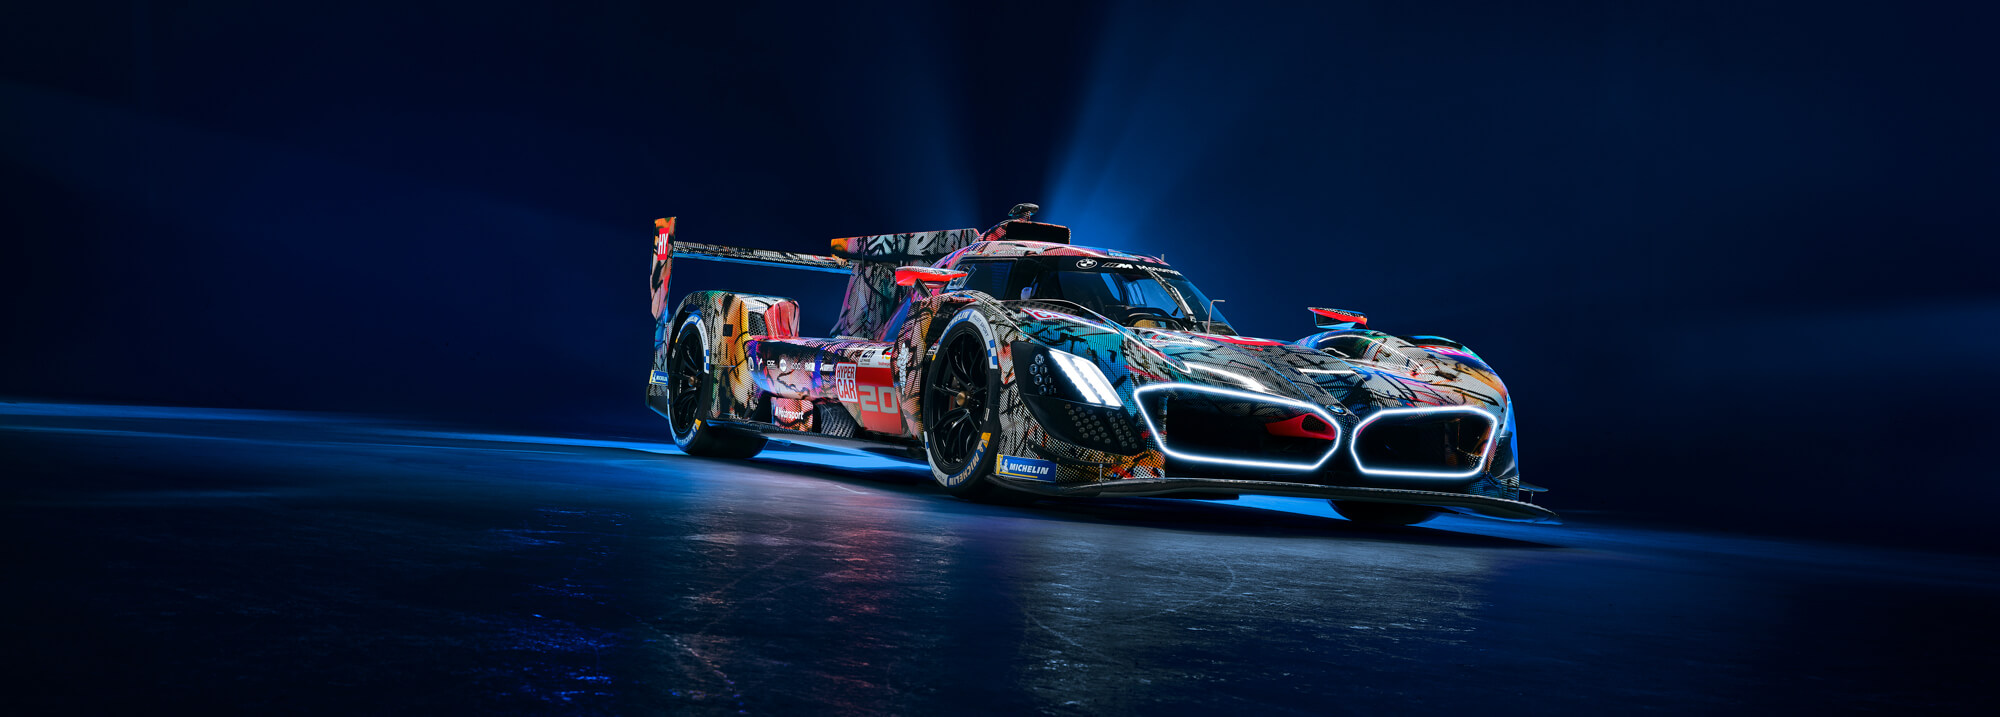 BMW unveils M Hybrid V8 Art Car ahead of 24 Hours of Le Mans video-banner